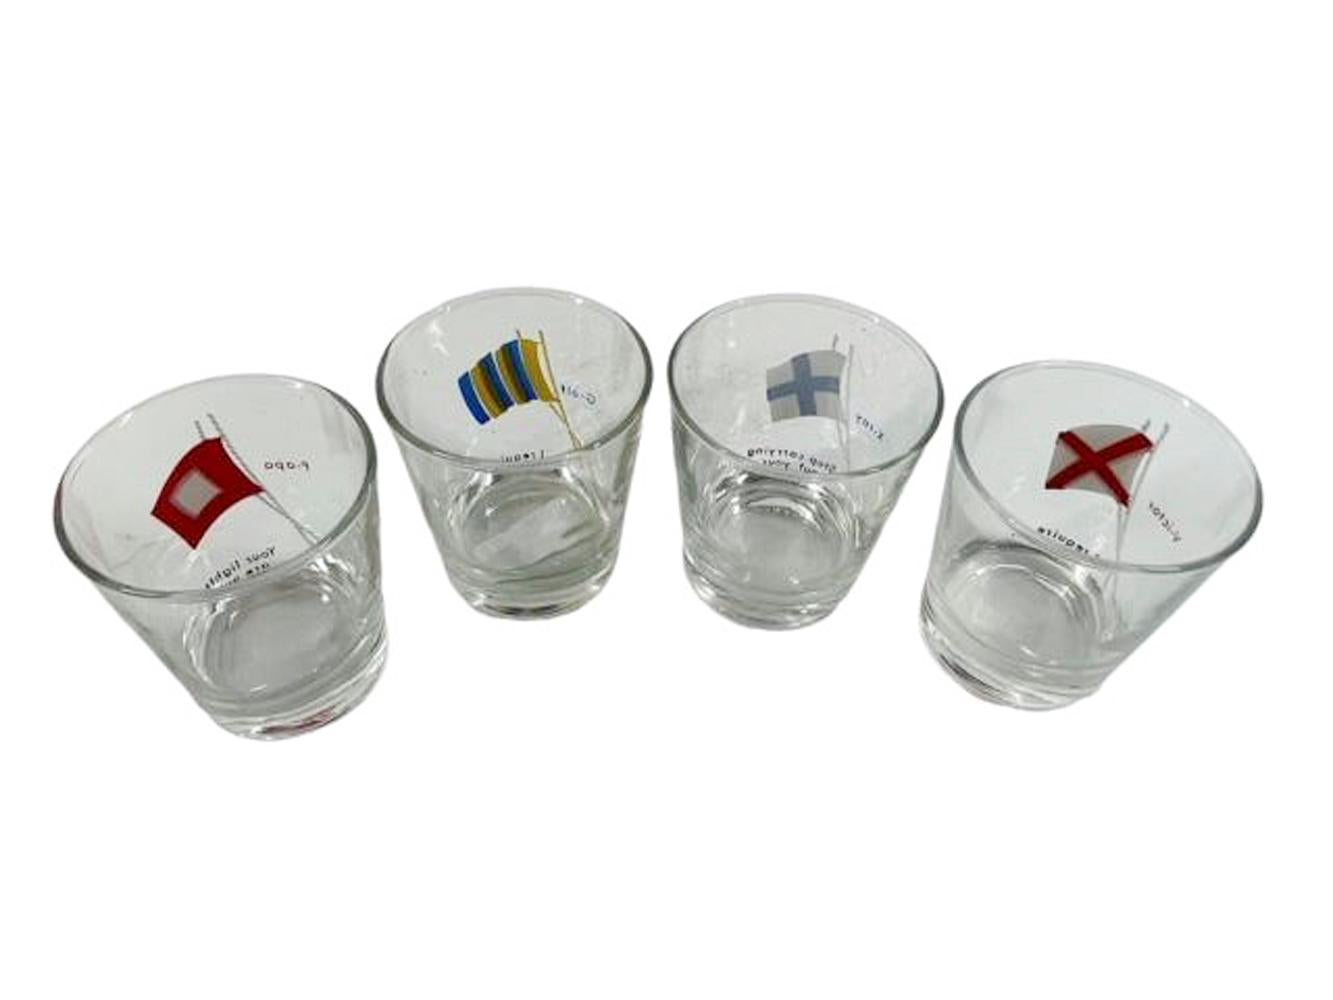 Vintage set of 4 old fashioned bar glasses in clear glass, each painted with a different nautical flag. To the left of each flag is the letter/word meaning and below each is a suggestive phrase.